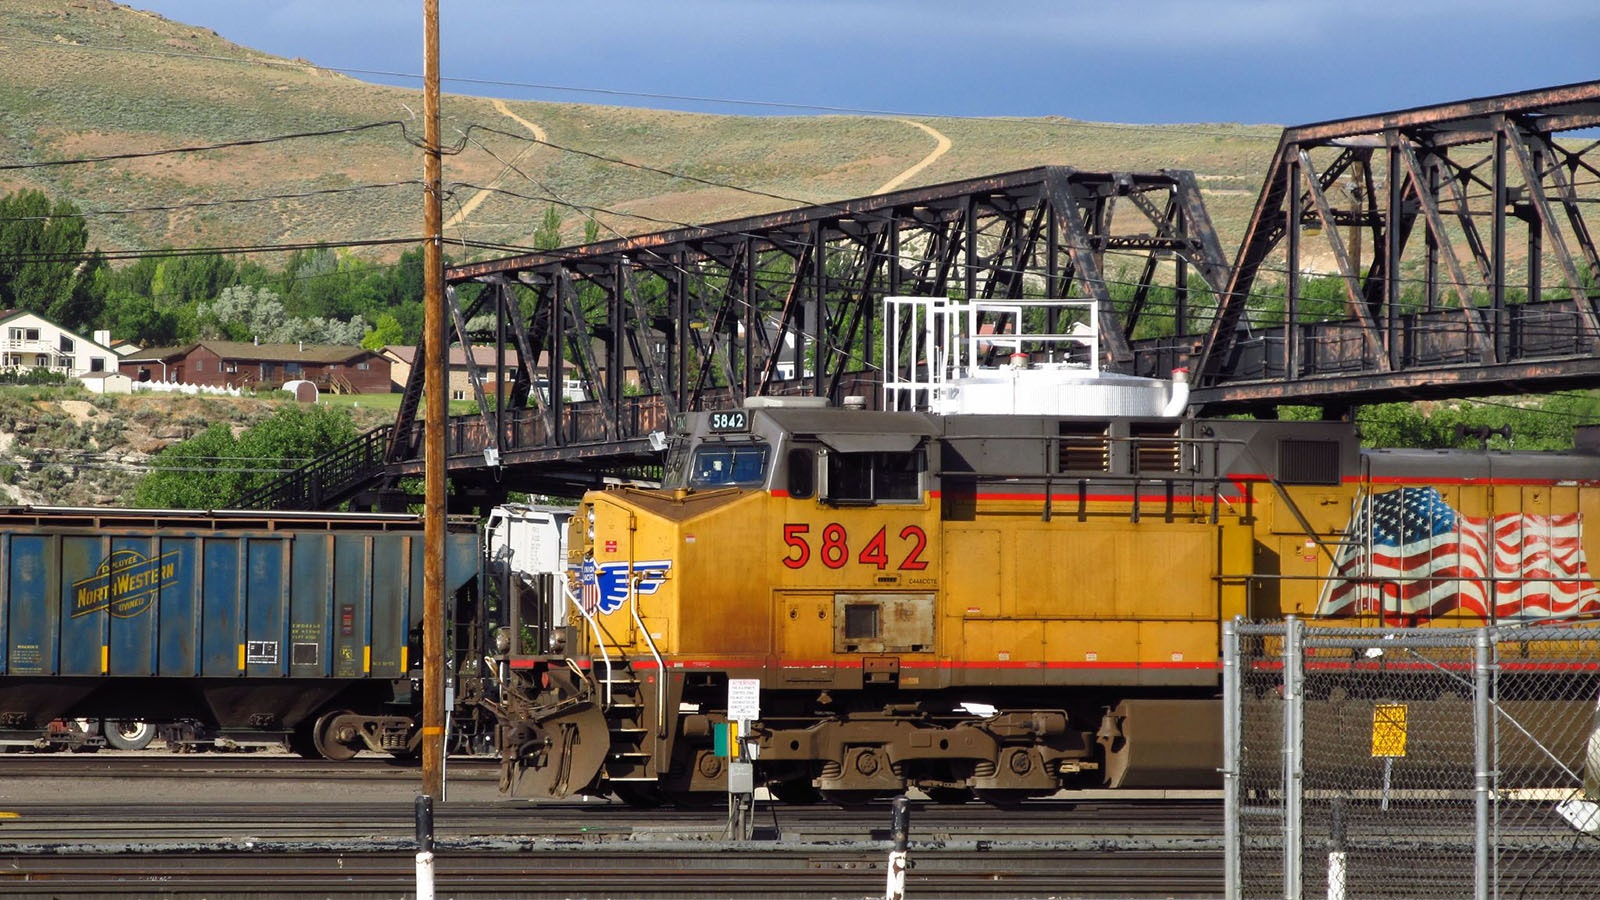 Green River, Wyoming, has been an important Wyoming rail hub for more than 150 years.